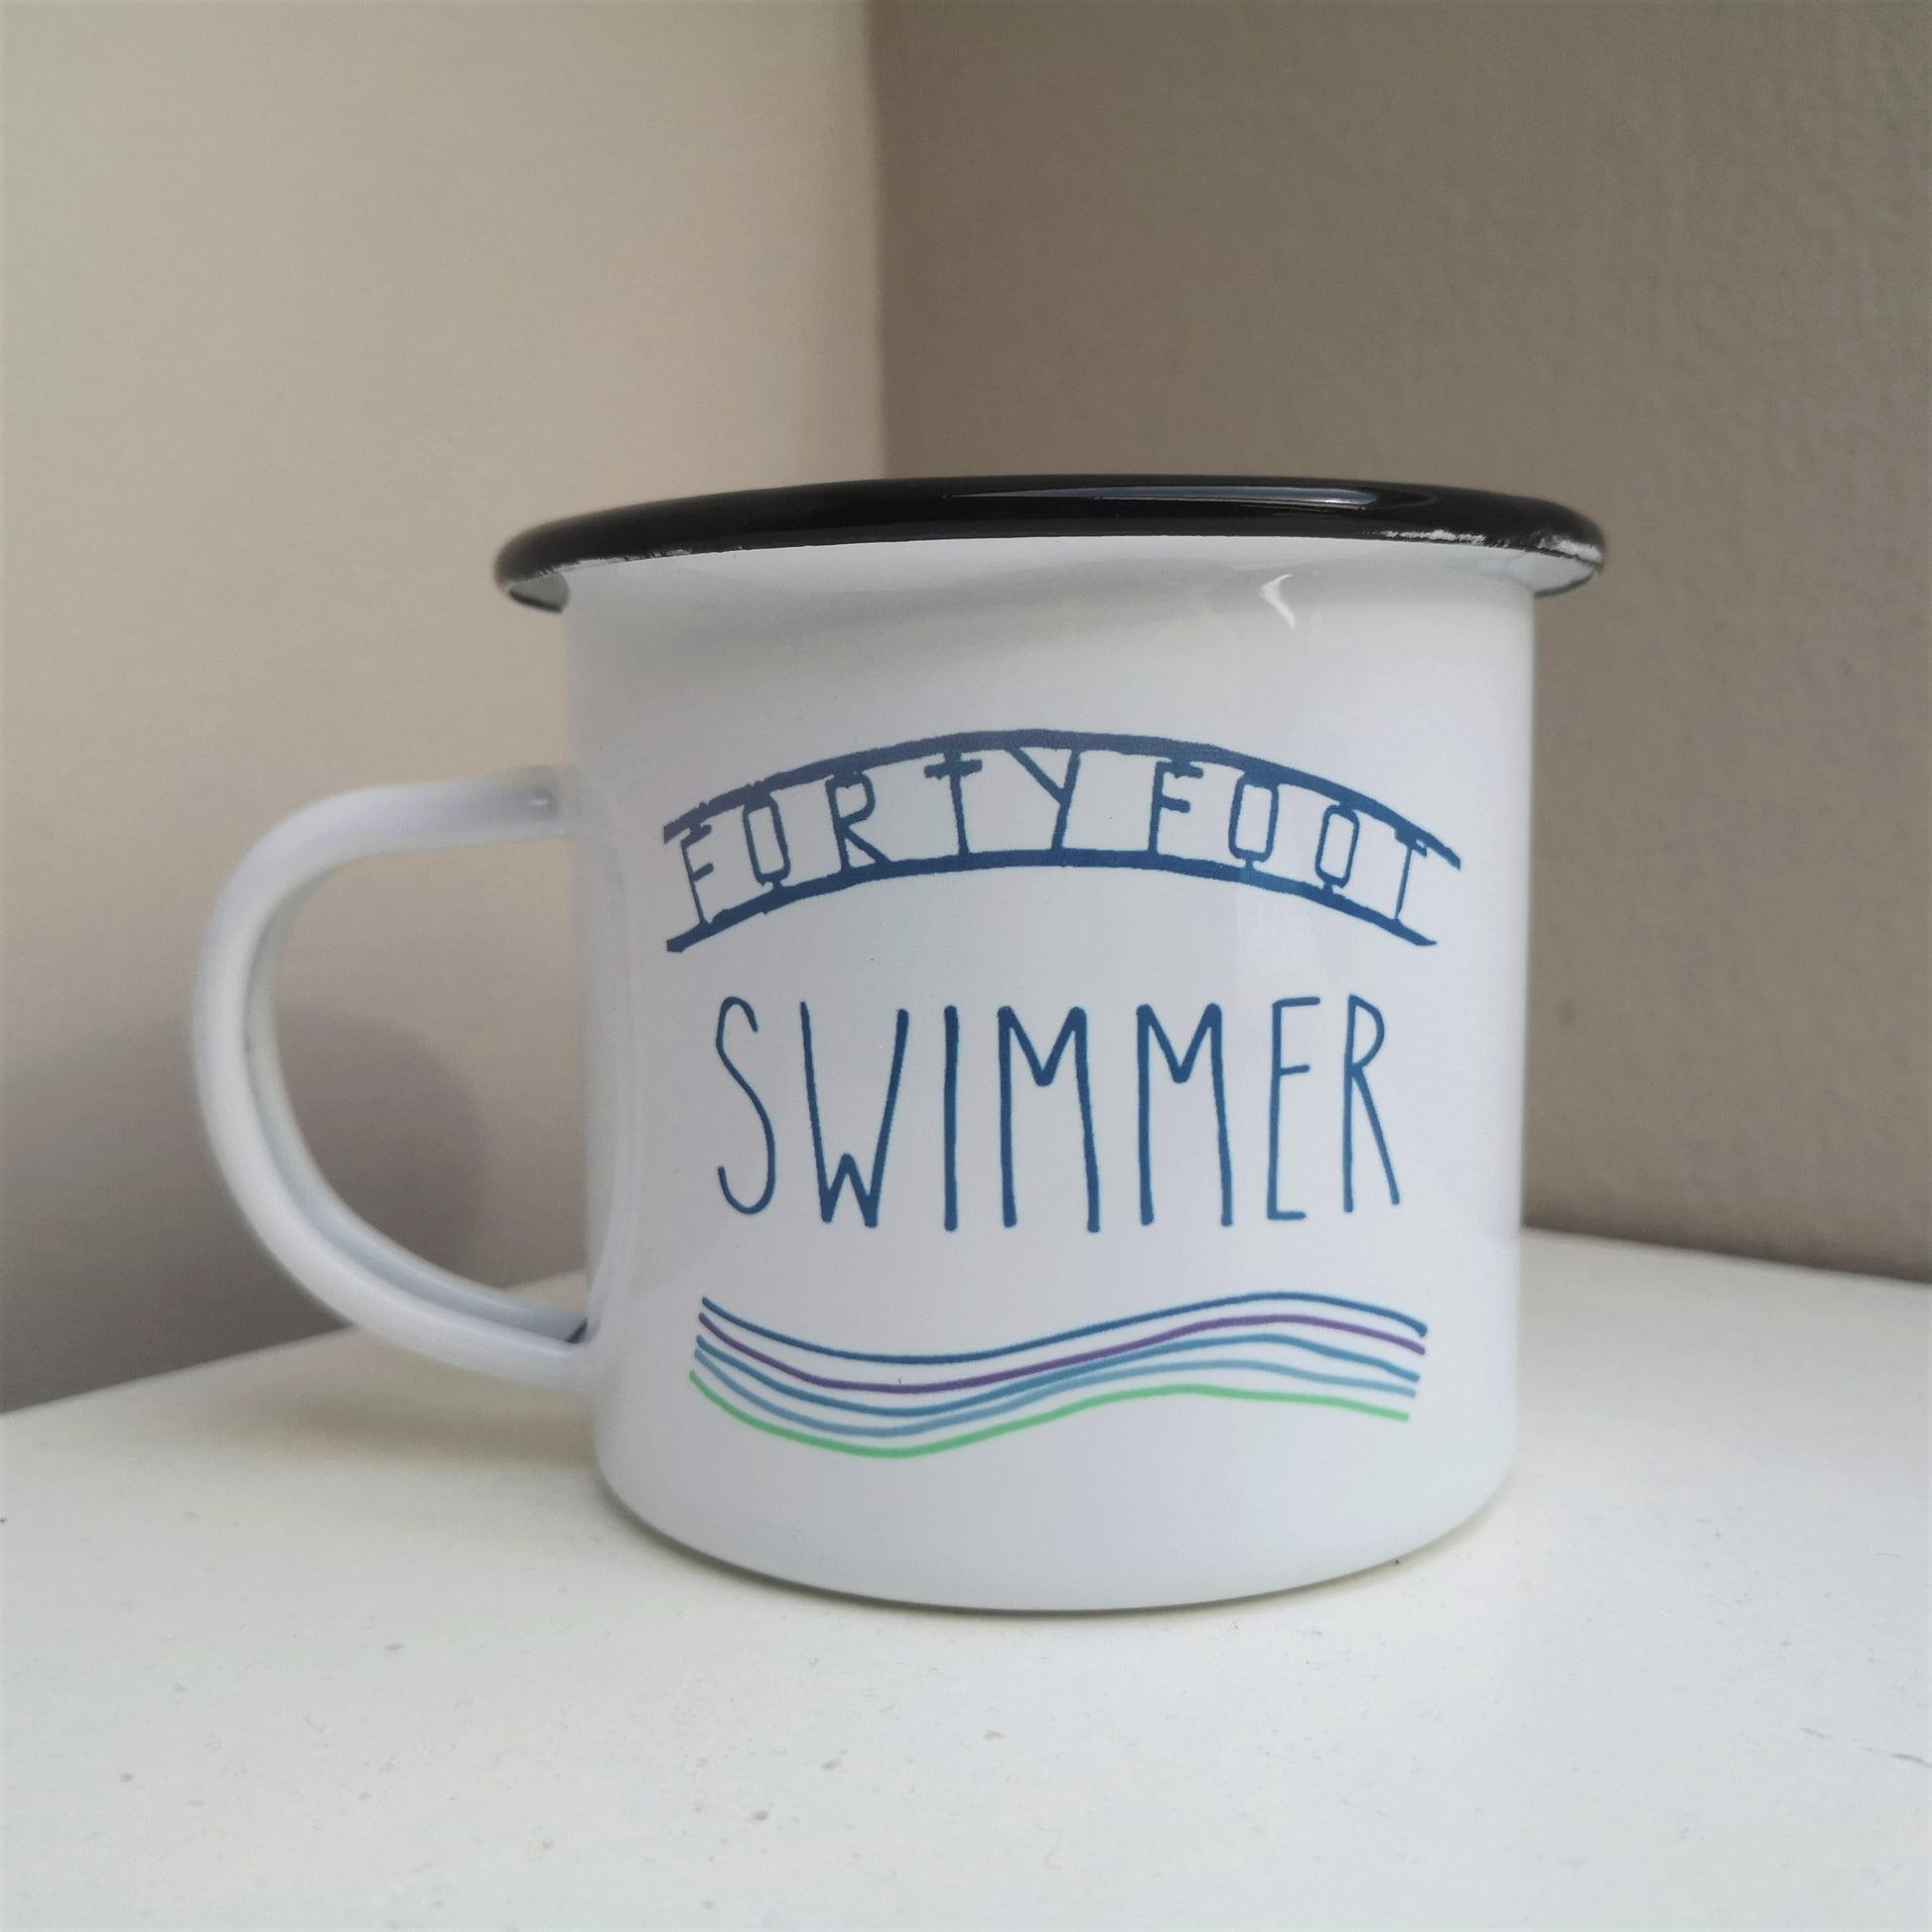 A white steel enamel mug with black rim, with FORTY FOOT SWIMMER written on it and some waves below, all in aquamarine tones.  The FORTY FOOT is the iconic sign that you see down at the bathing place